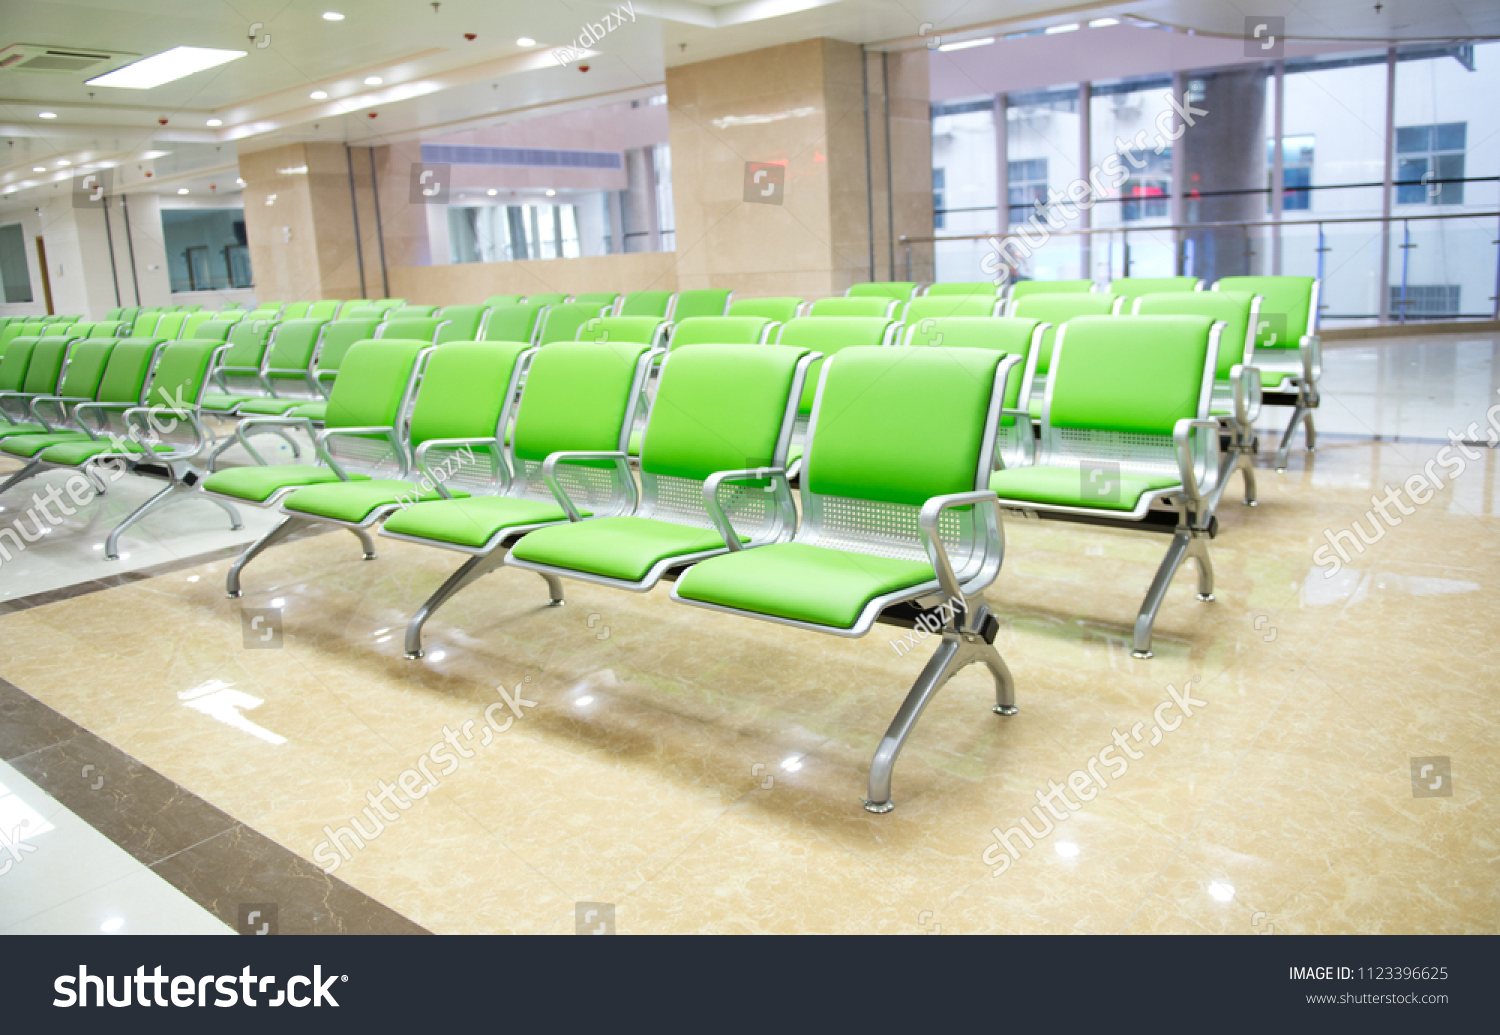 Hospital Waiting Room Empty Chairs Stock Photo Edit Now 1123396625